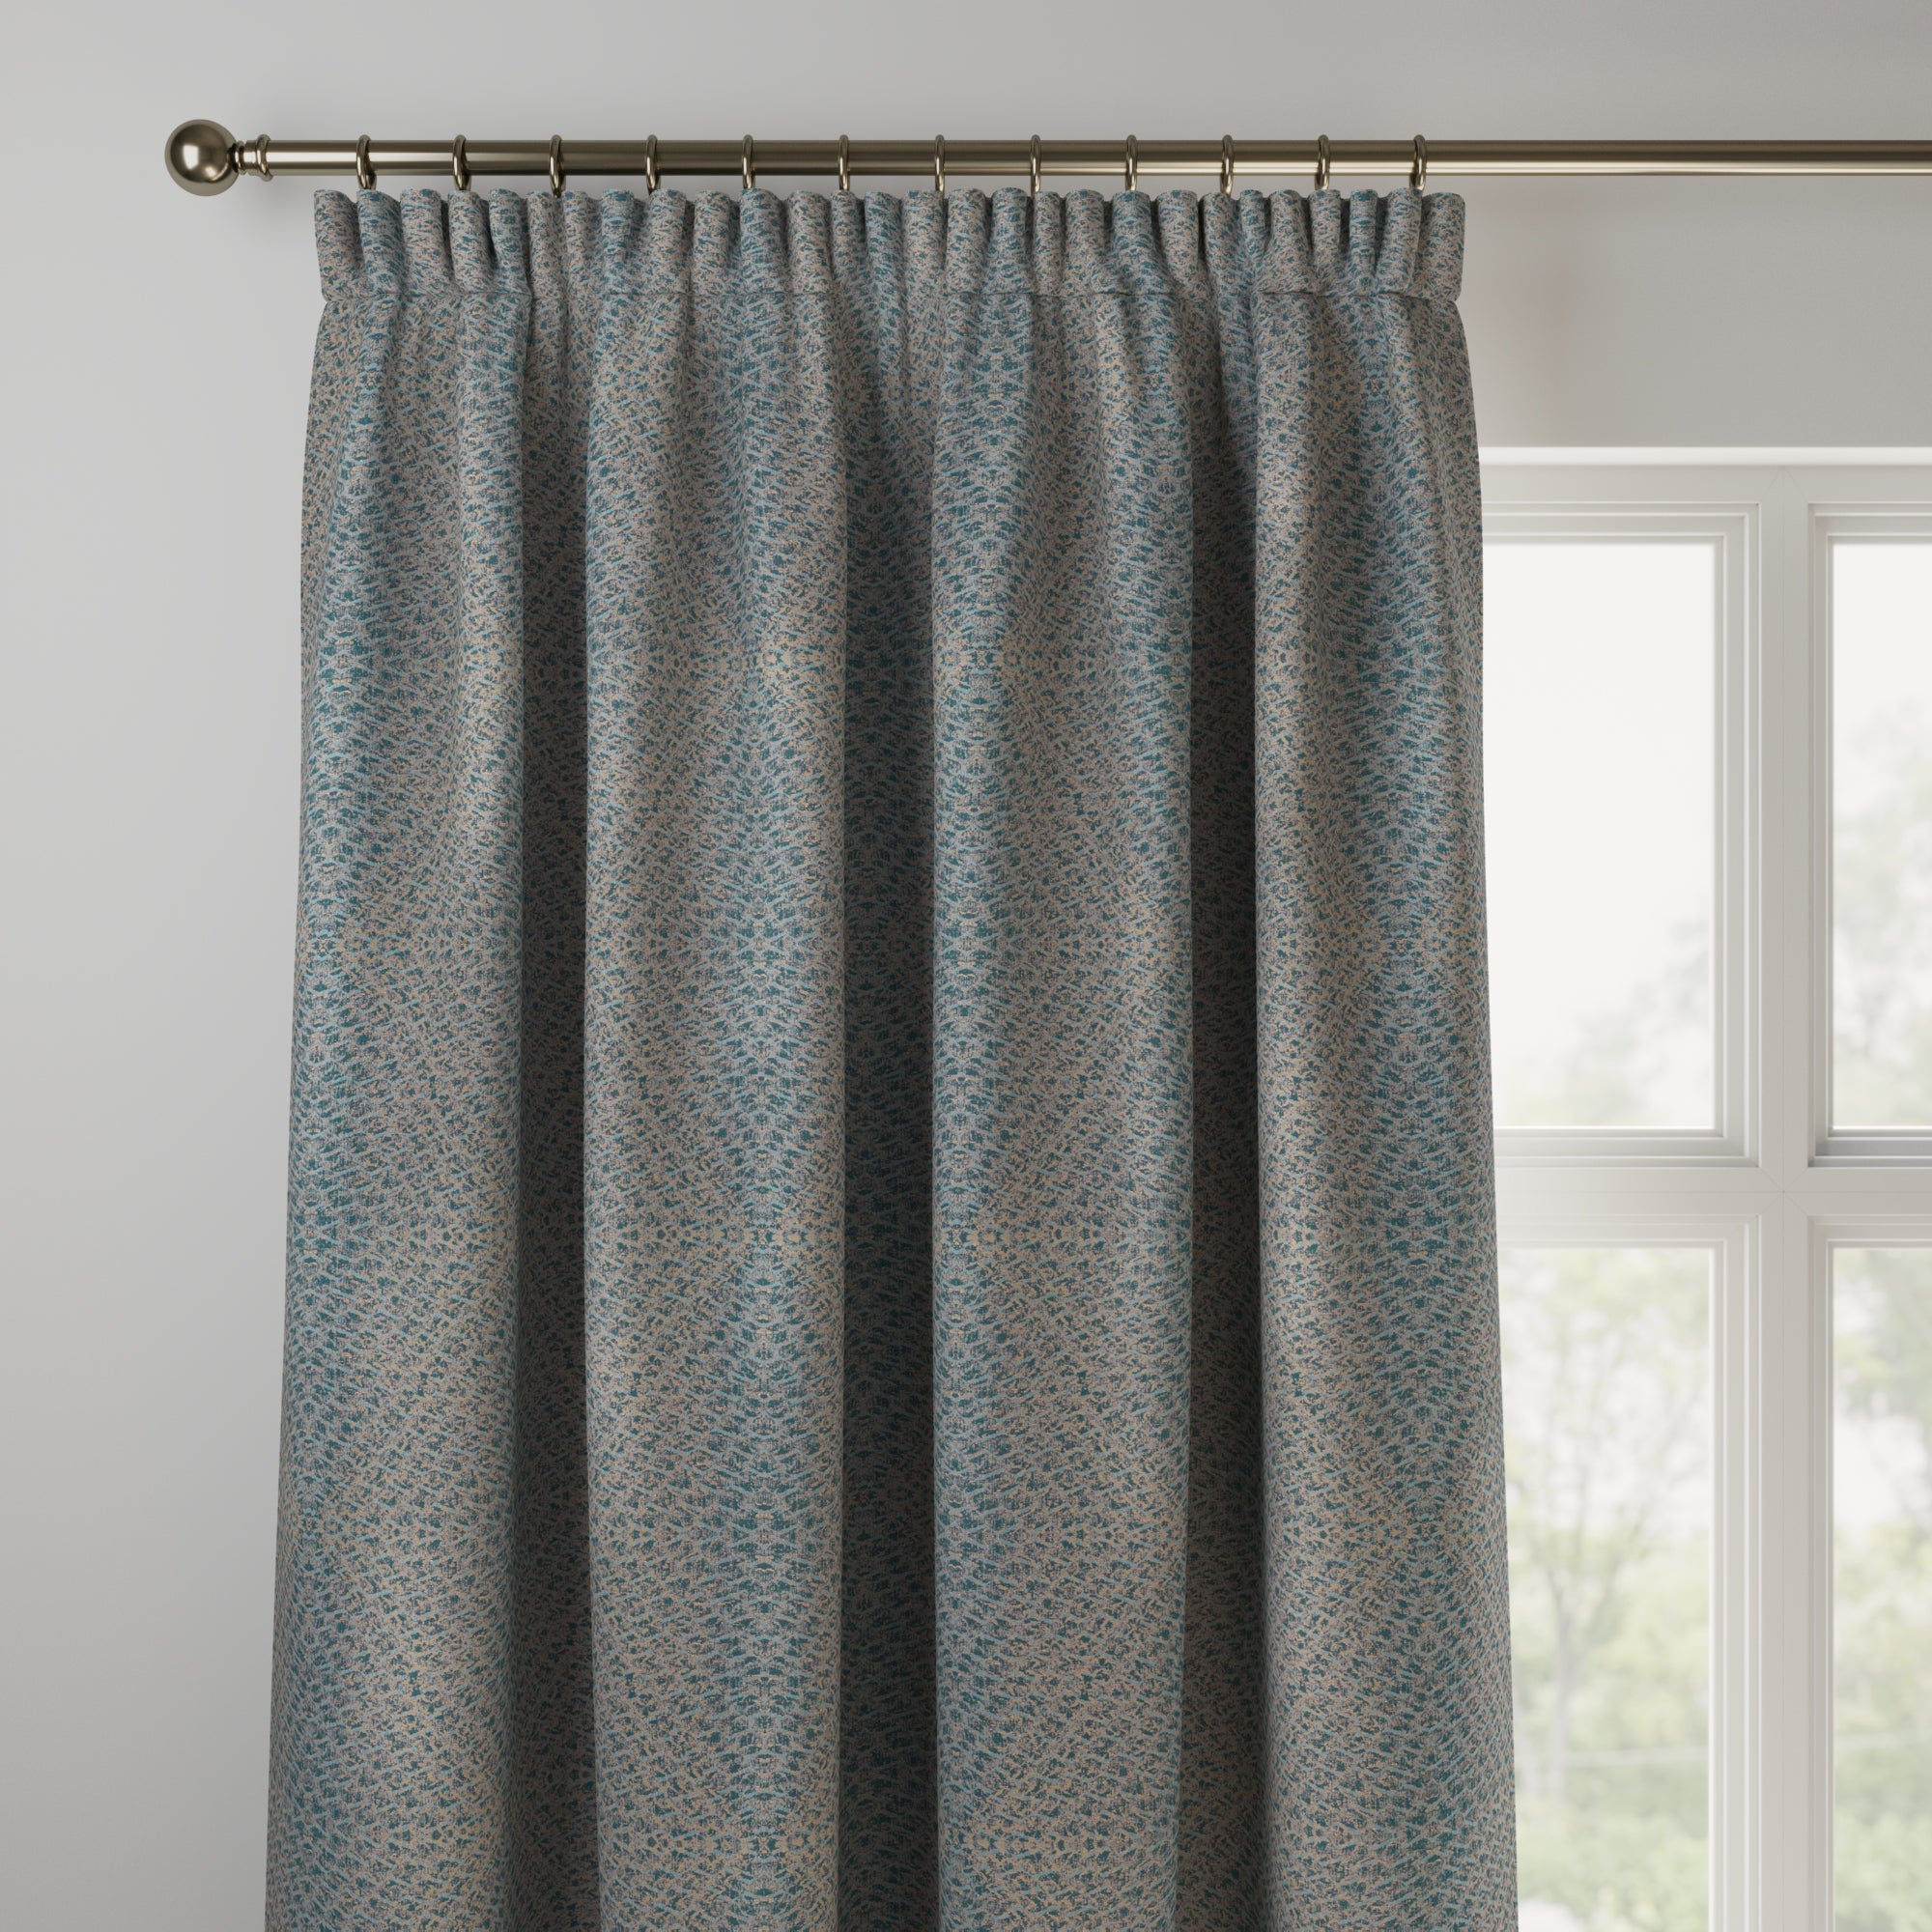 Canberra Made to Measure Curtains Canberra Teal